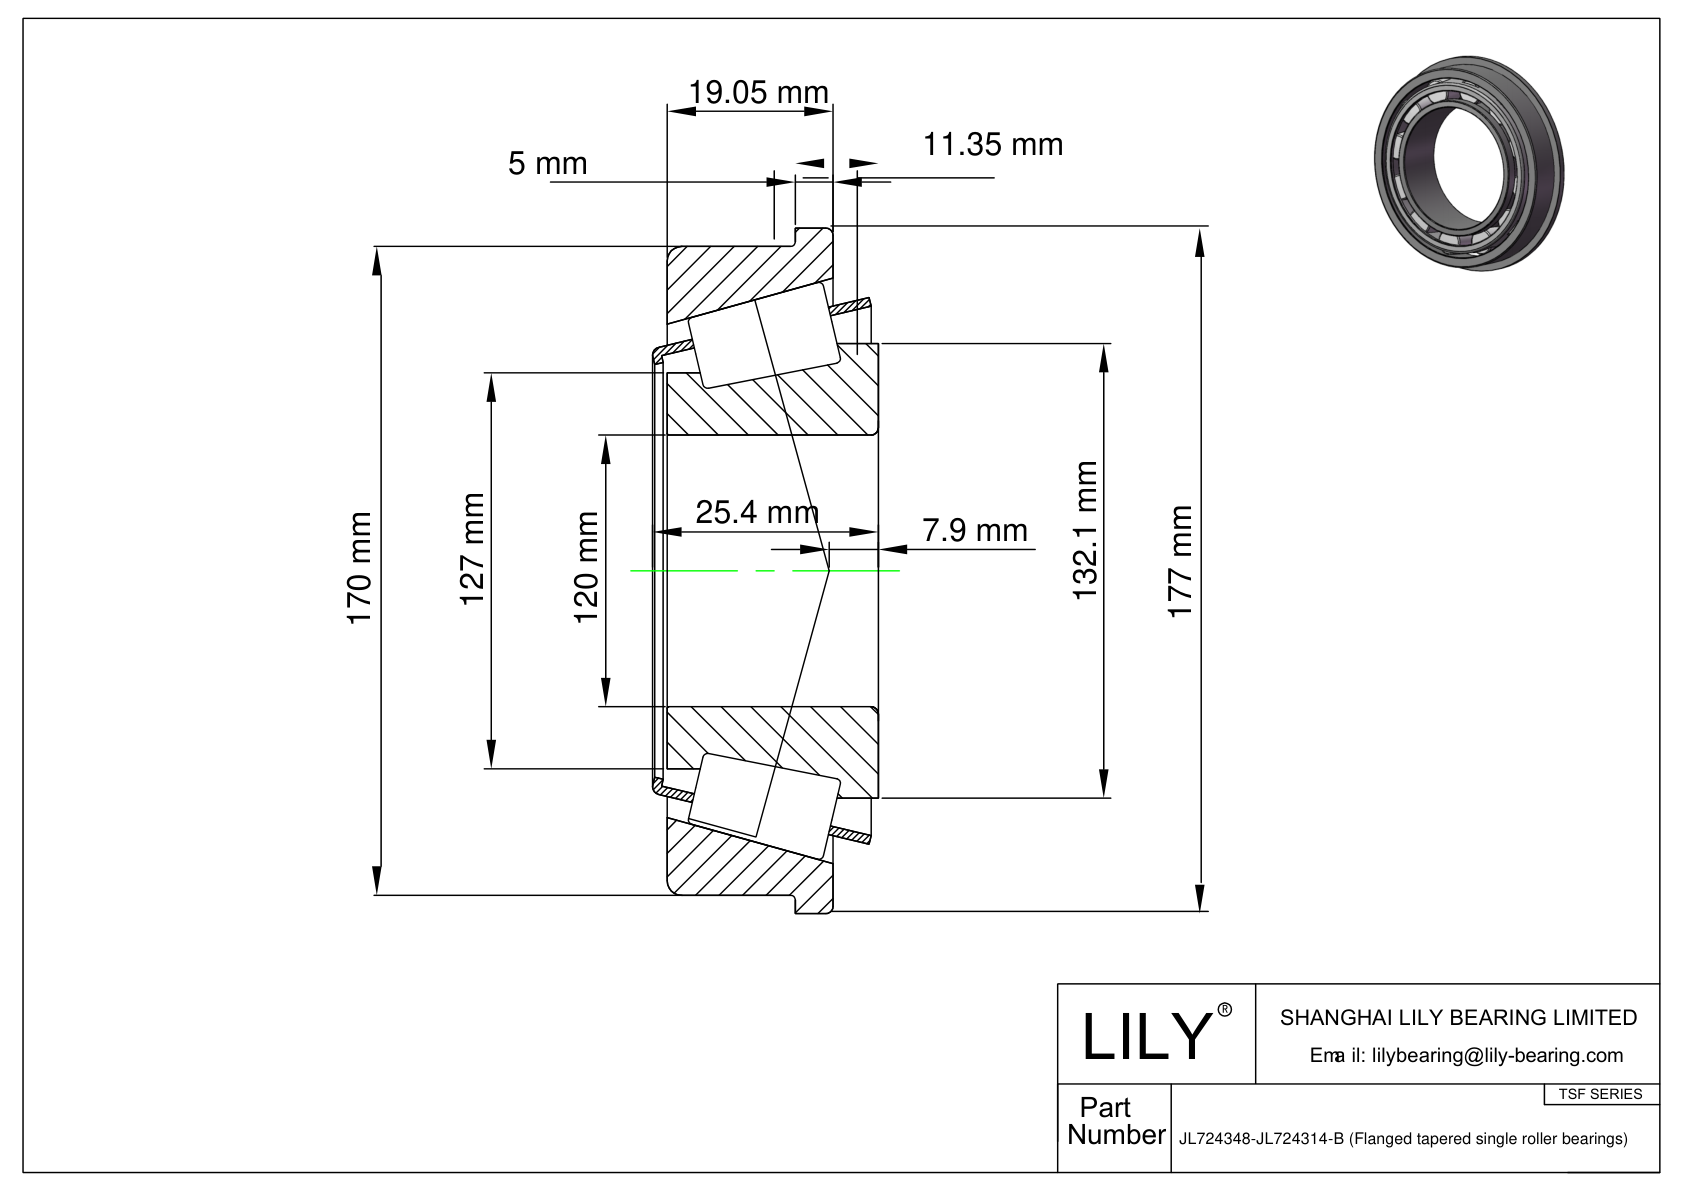 JL724348-JL724314-B TSF (Tapered Single Roller Bearings with Flange) (Metric) cad drawing